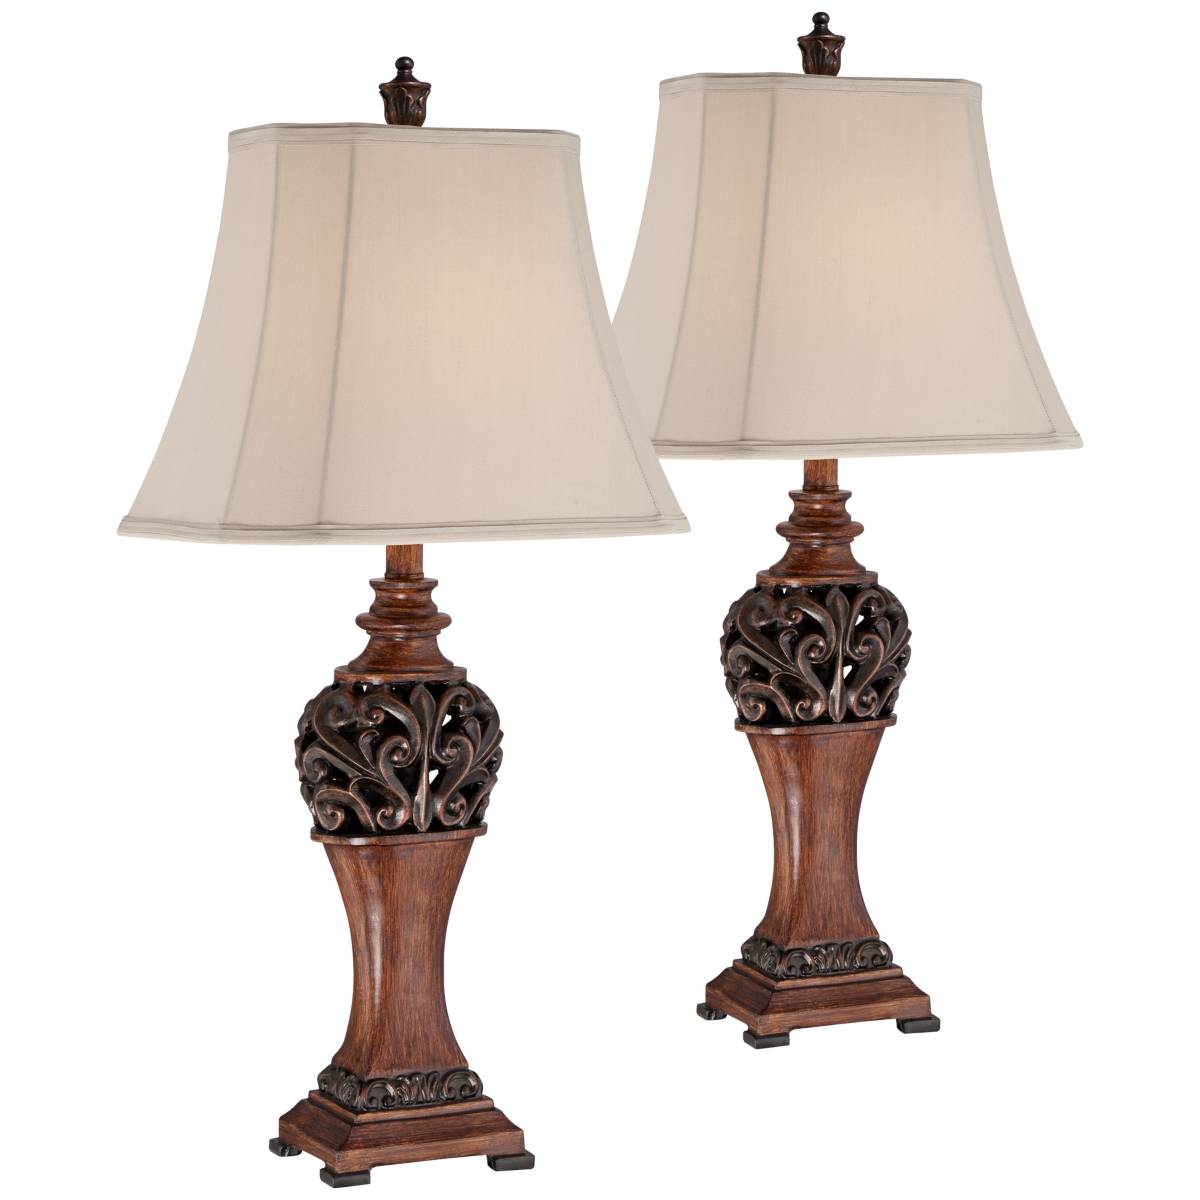 Traditional Table Lamp Sets - Classic Lamp Designs | Lamps Plus